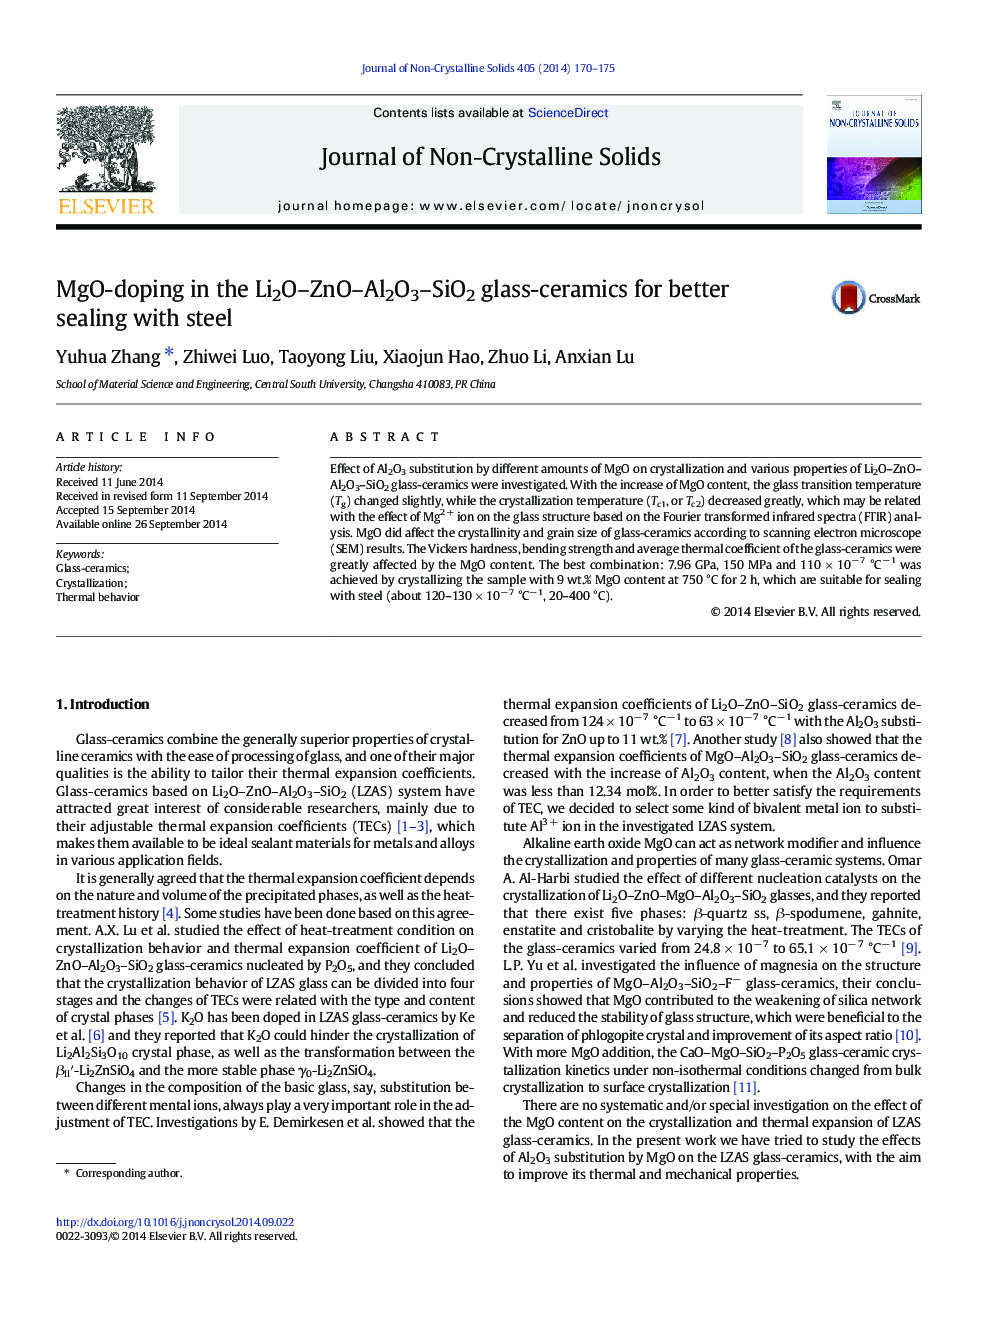 MgO-doping in the Li2O–ZnO–Al2O3–SiO2 glass-ceramics for better sealing with steel